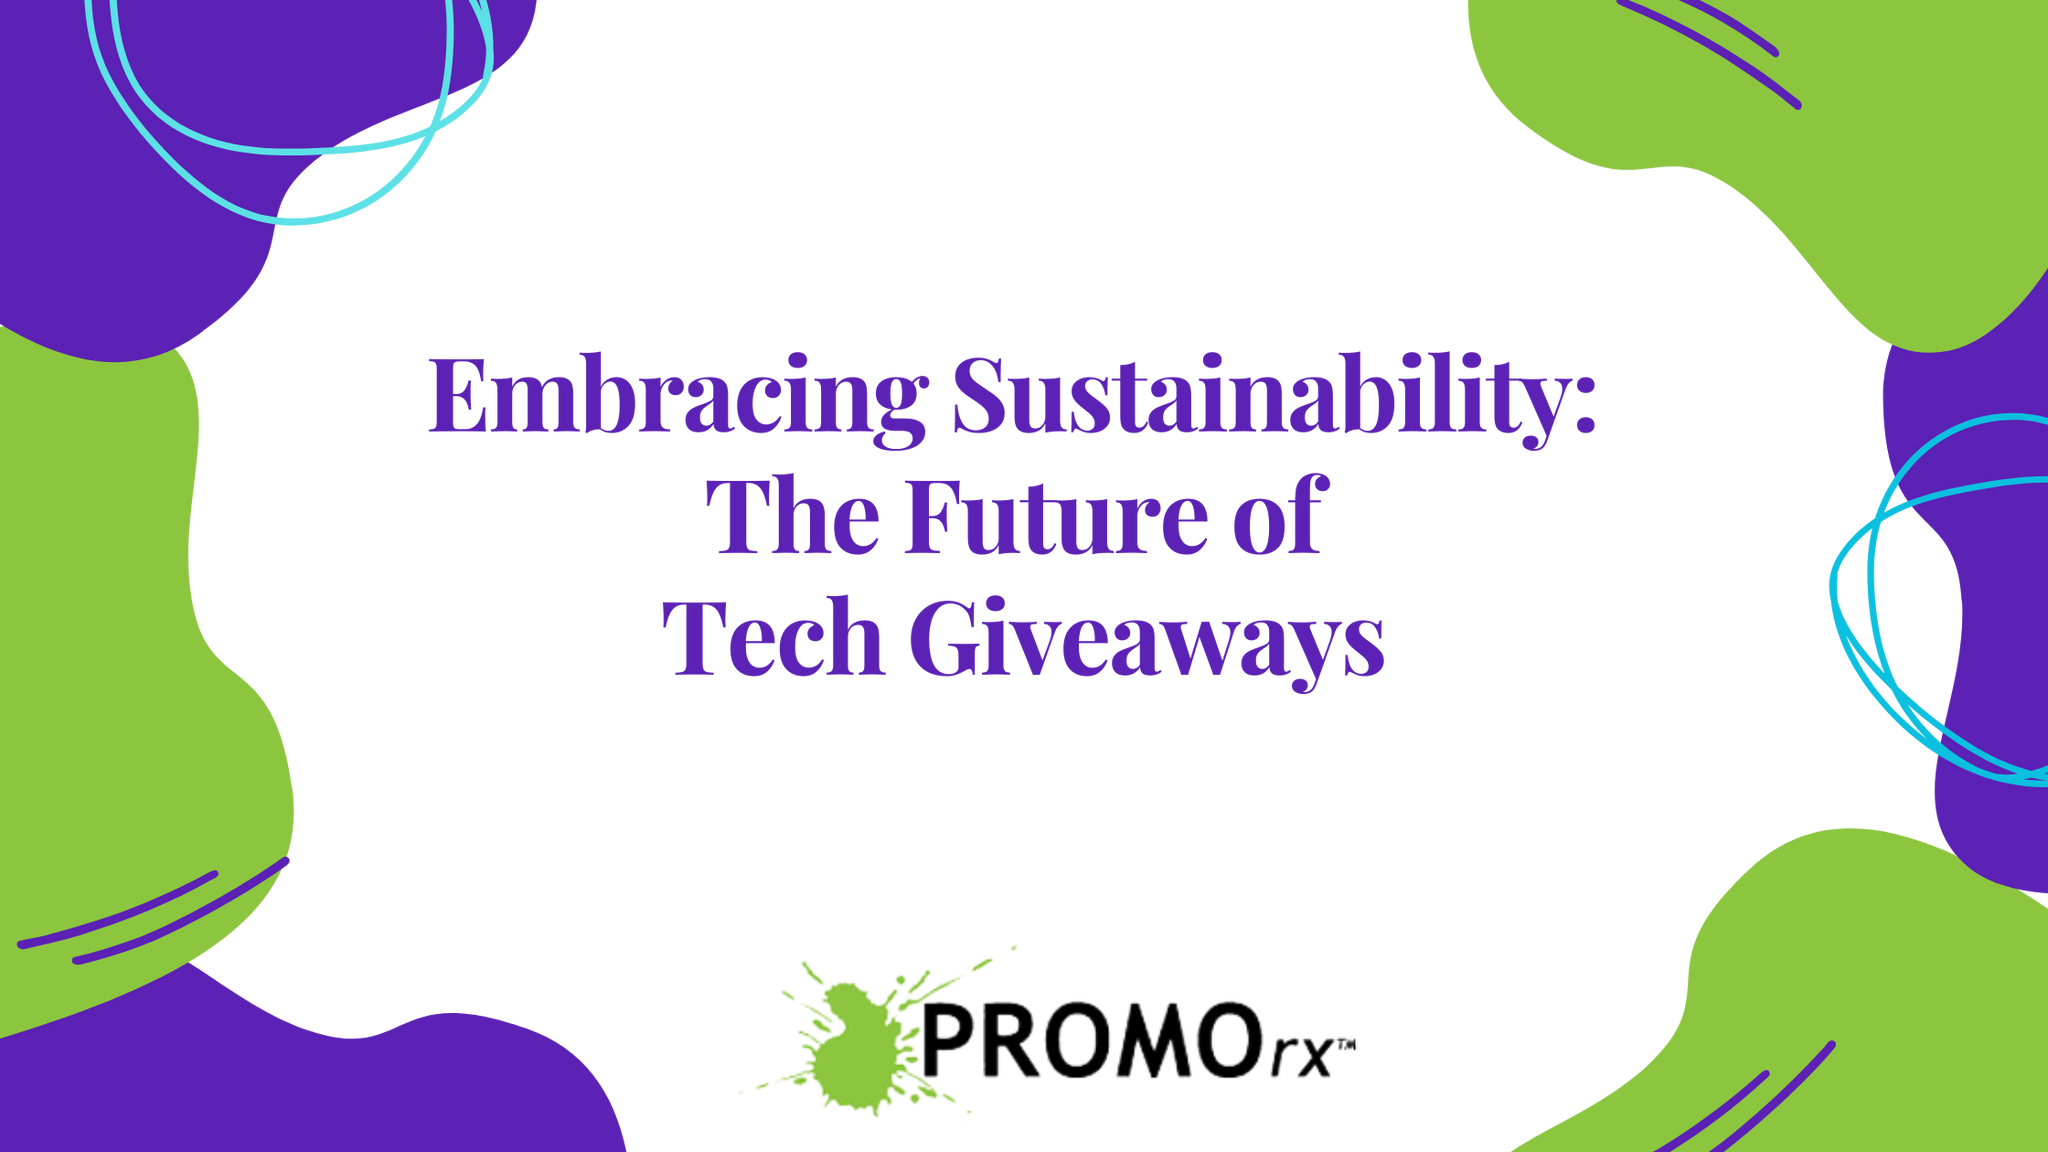 Embracing Sustainability: The Future of Tech Giveaways